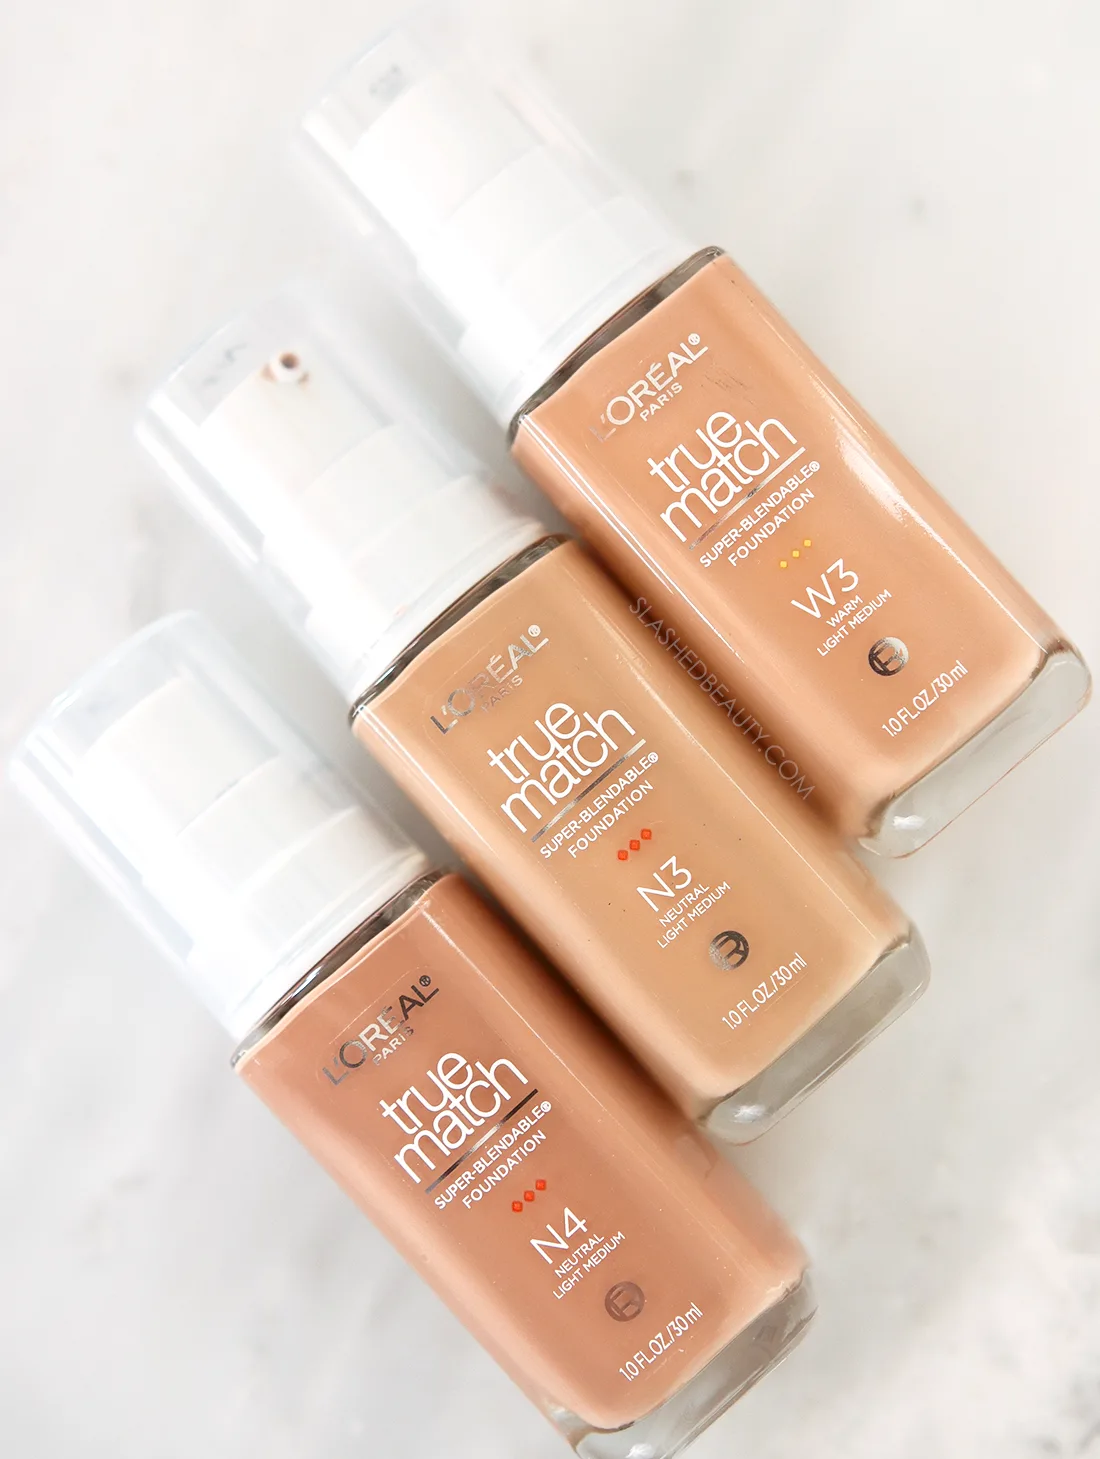 Three bottles of the L'Oreal True Match Super Blendable Foundation lying flat | NEW L'Oreal True Match Foundation Review 2023 | Slashed Beauty